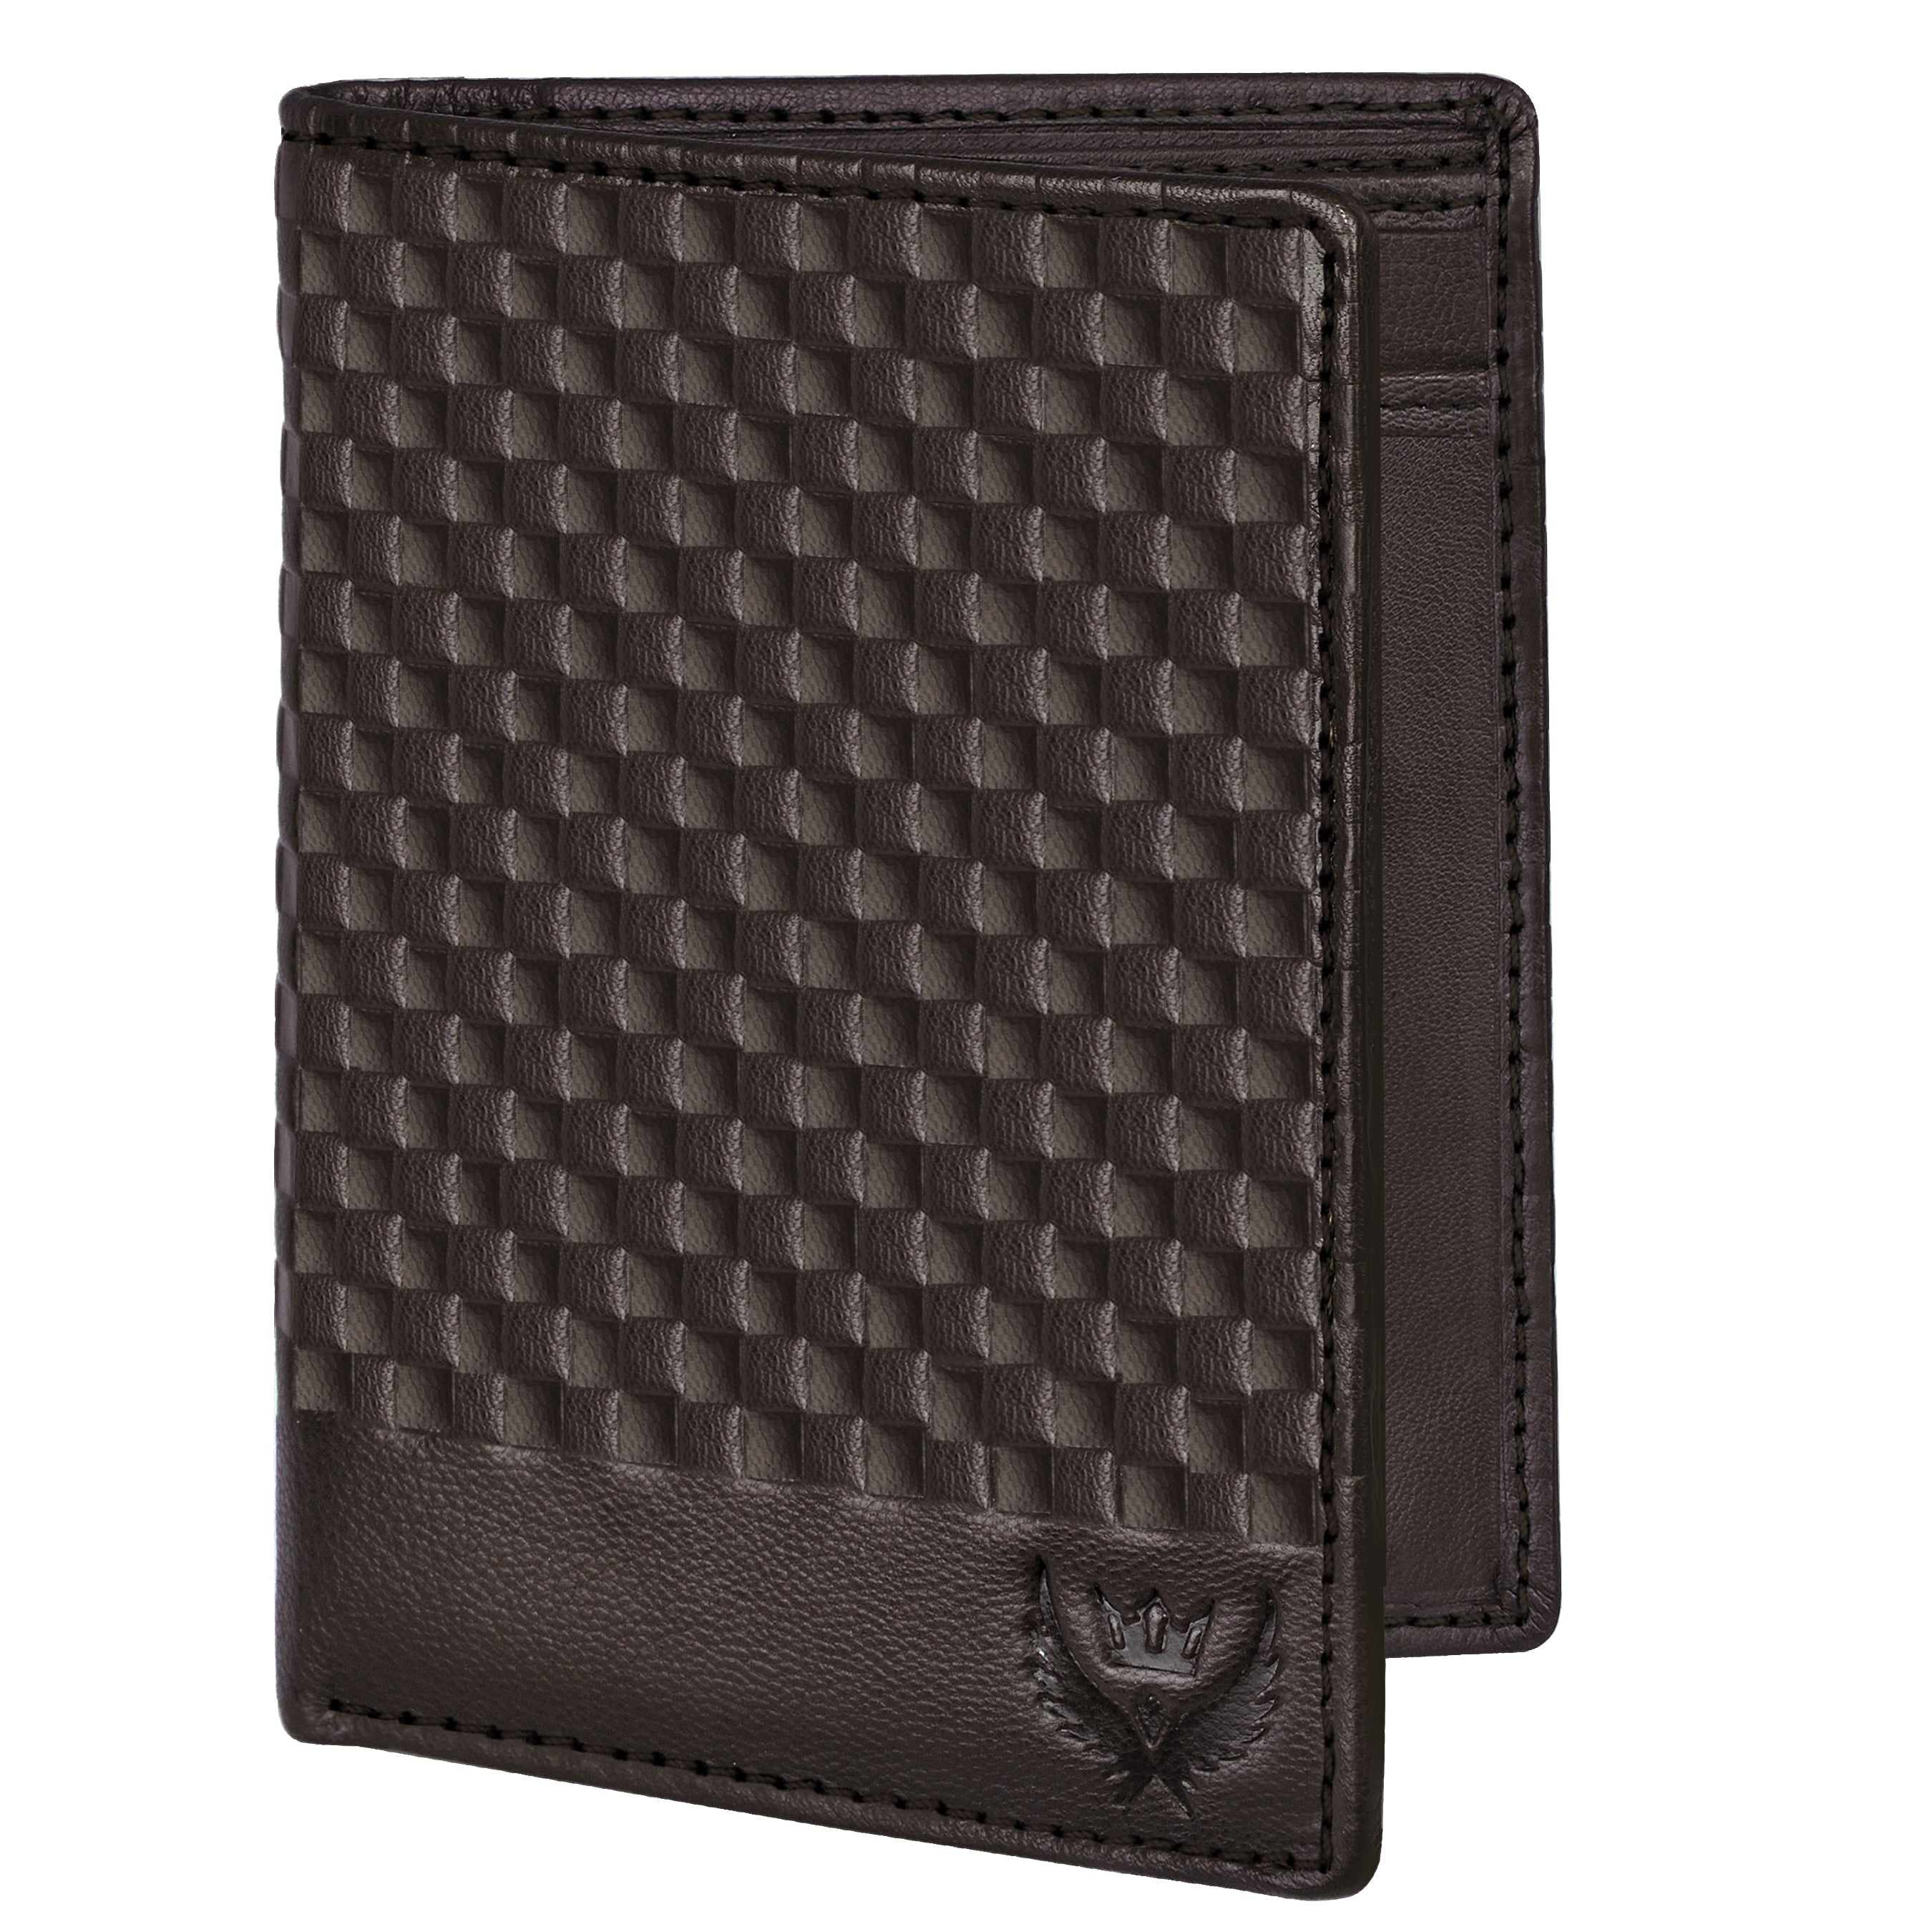 Large Capacity Unisex Wallet - Dark Brown Genuine Leather with RFID Blocking and Textured Finish